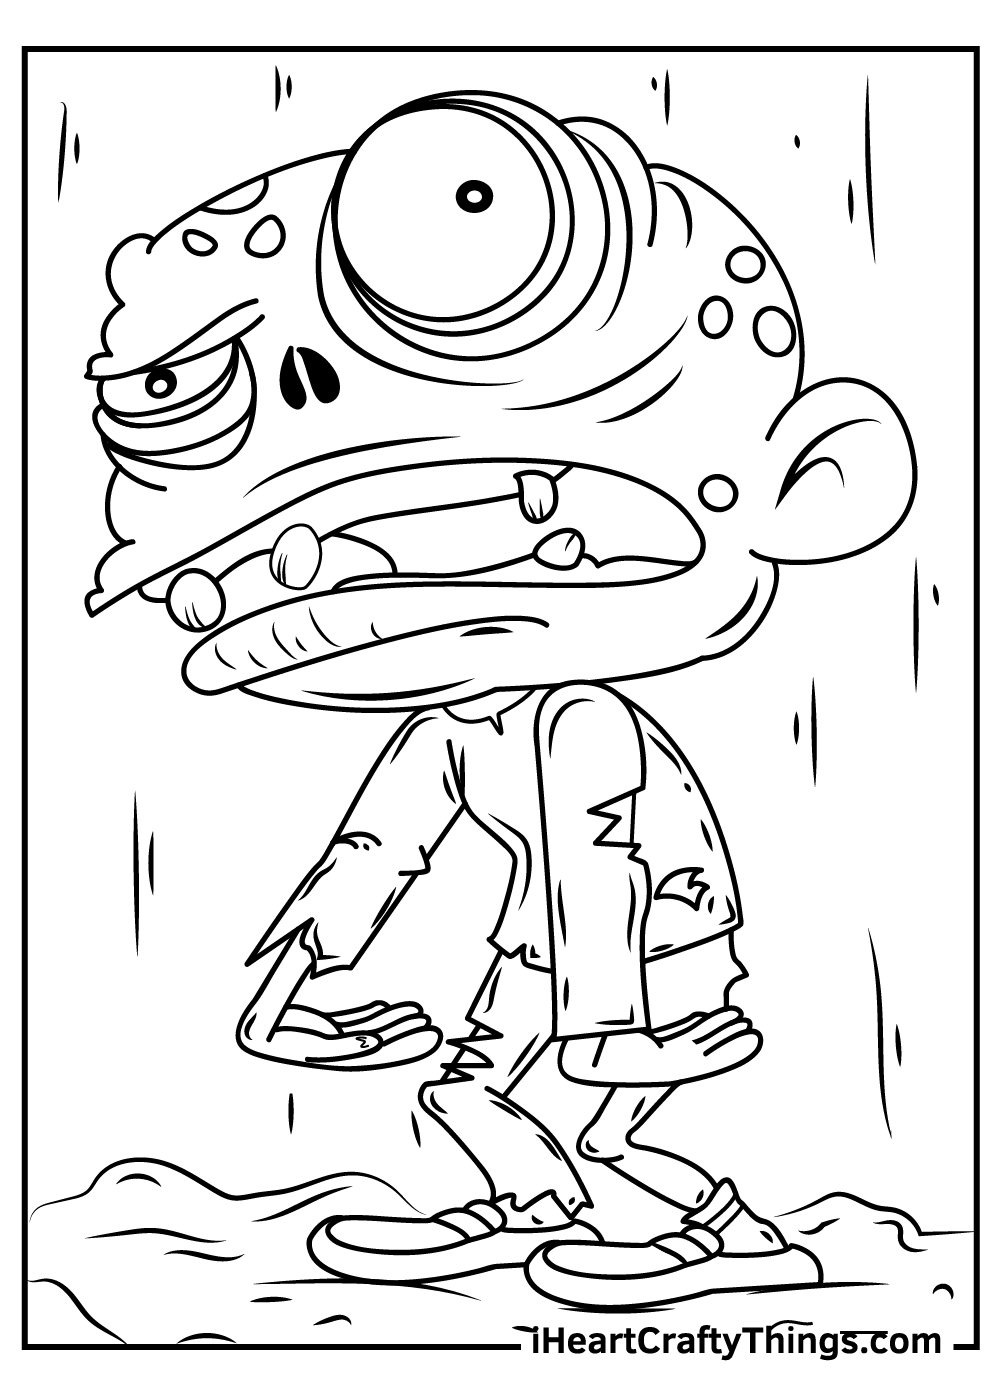 Printable Zombie Coloring Pages Updated 20